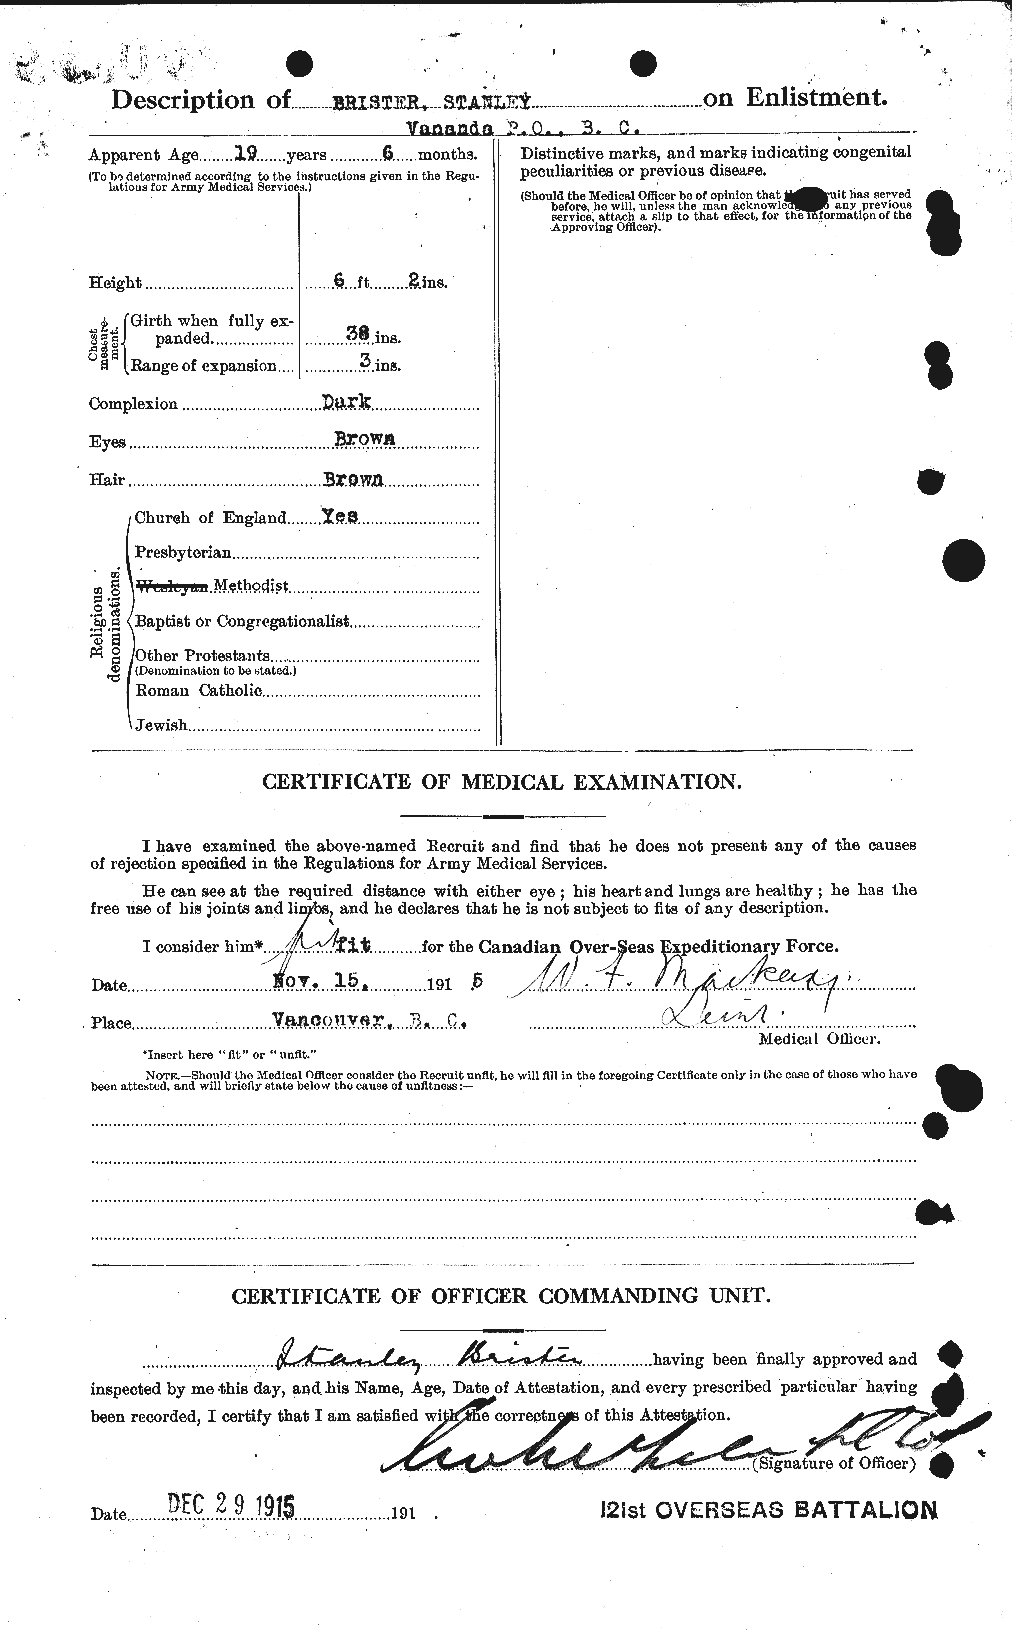 Personnel Records of the First World War - CEF 260310b